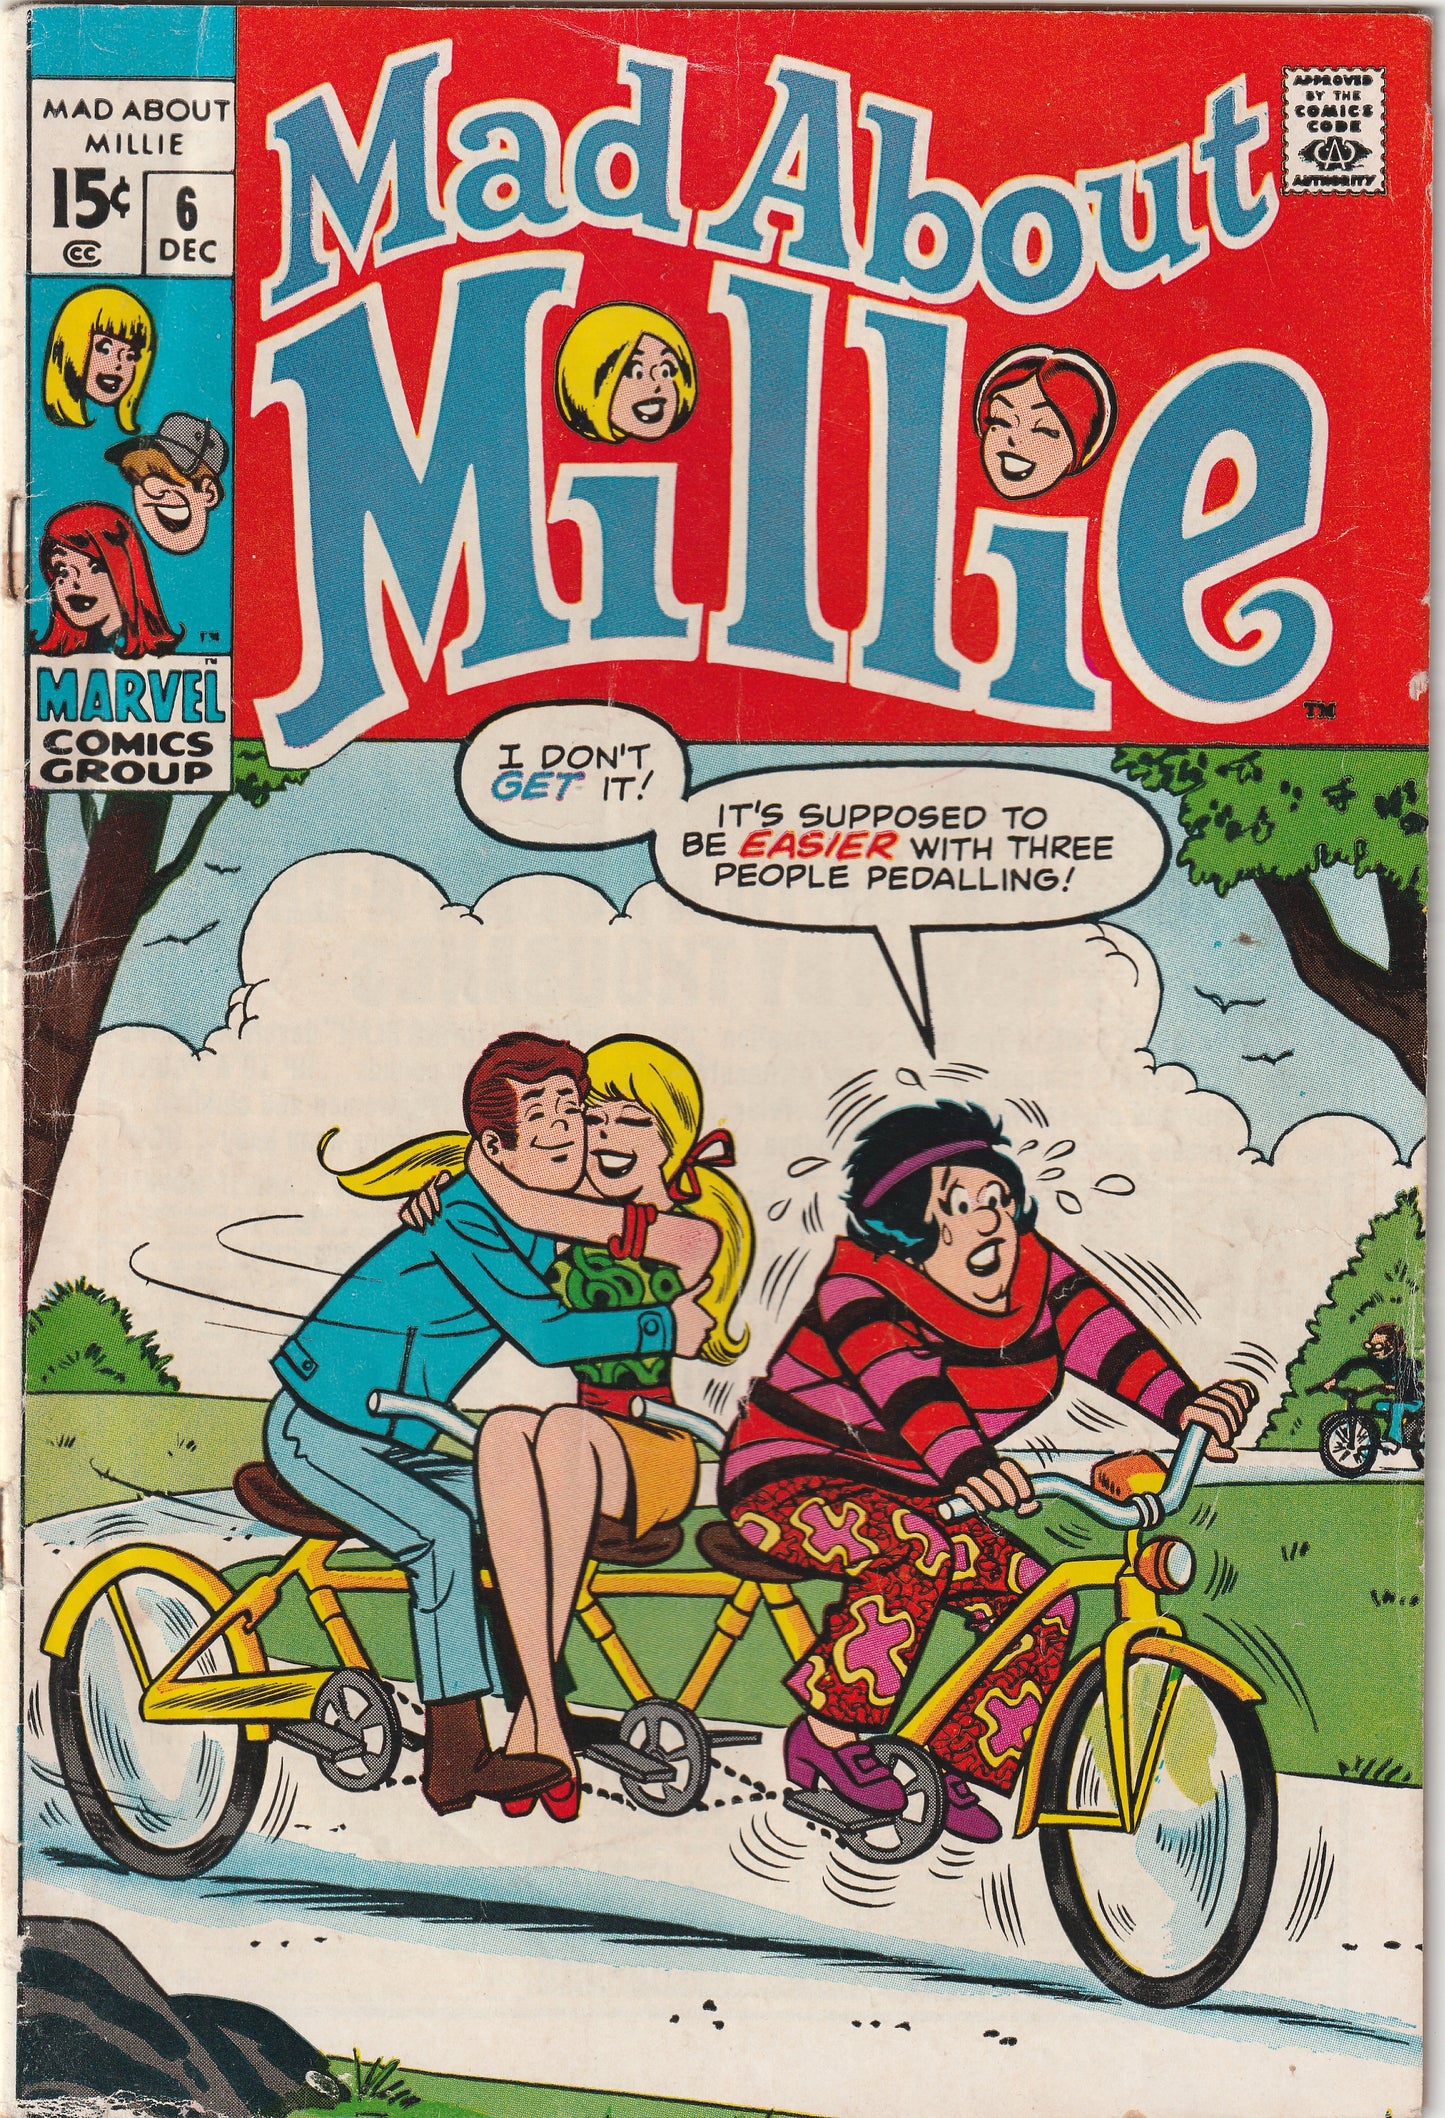 Mad About Millie #6 (1969) - VG - Final Silver Age Issue